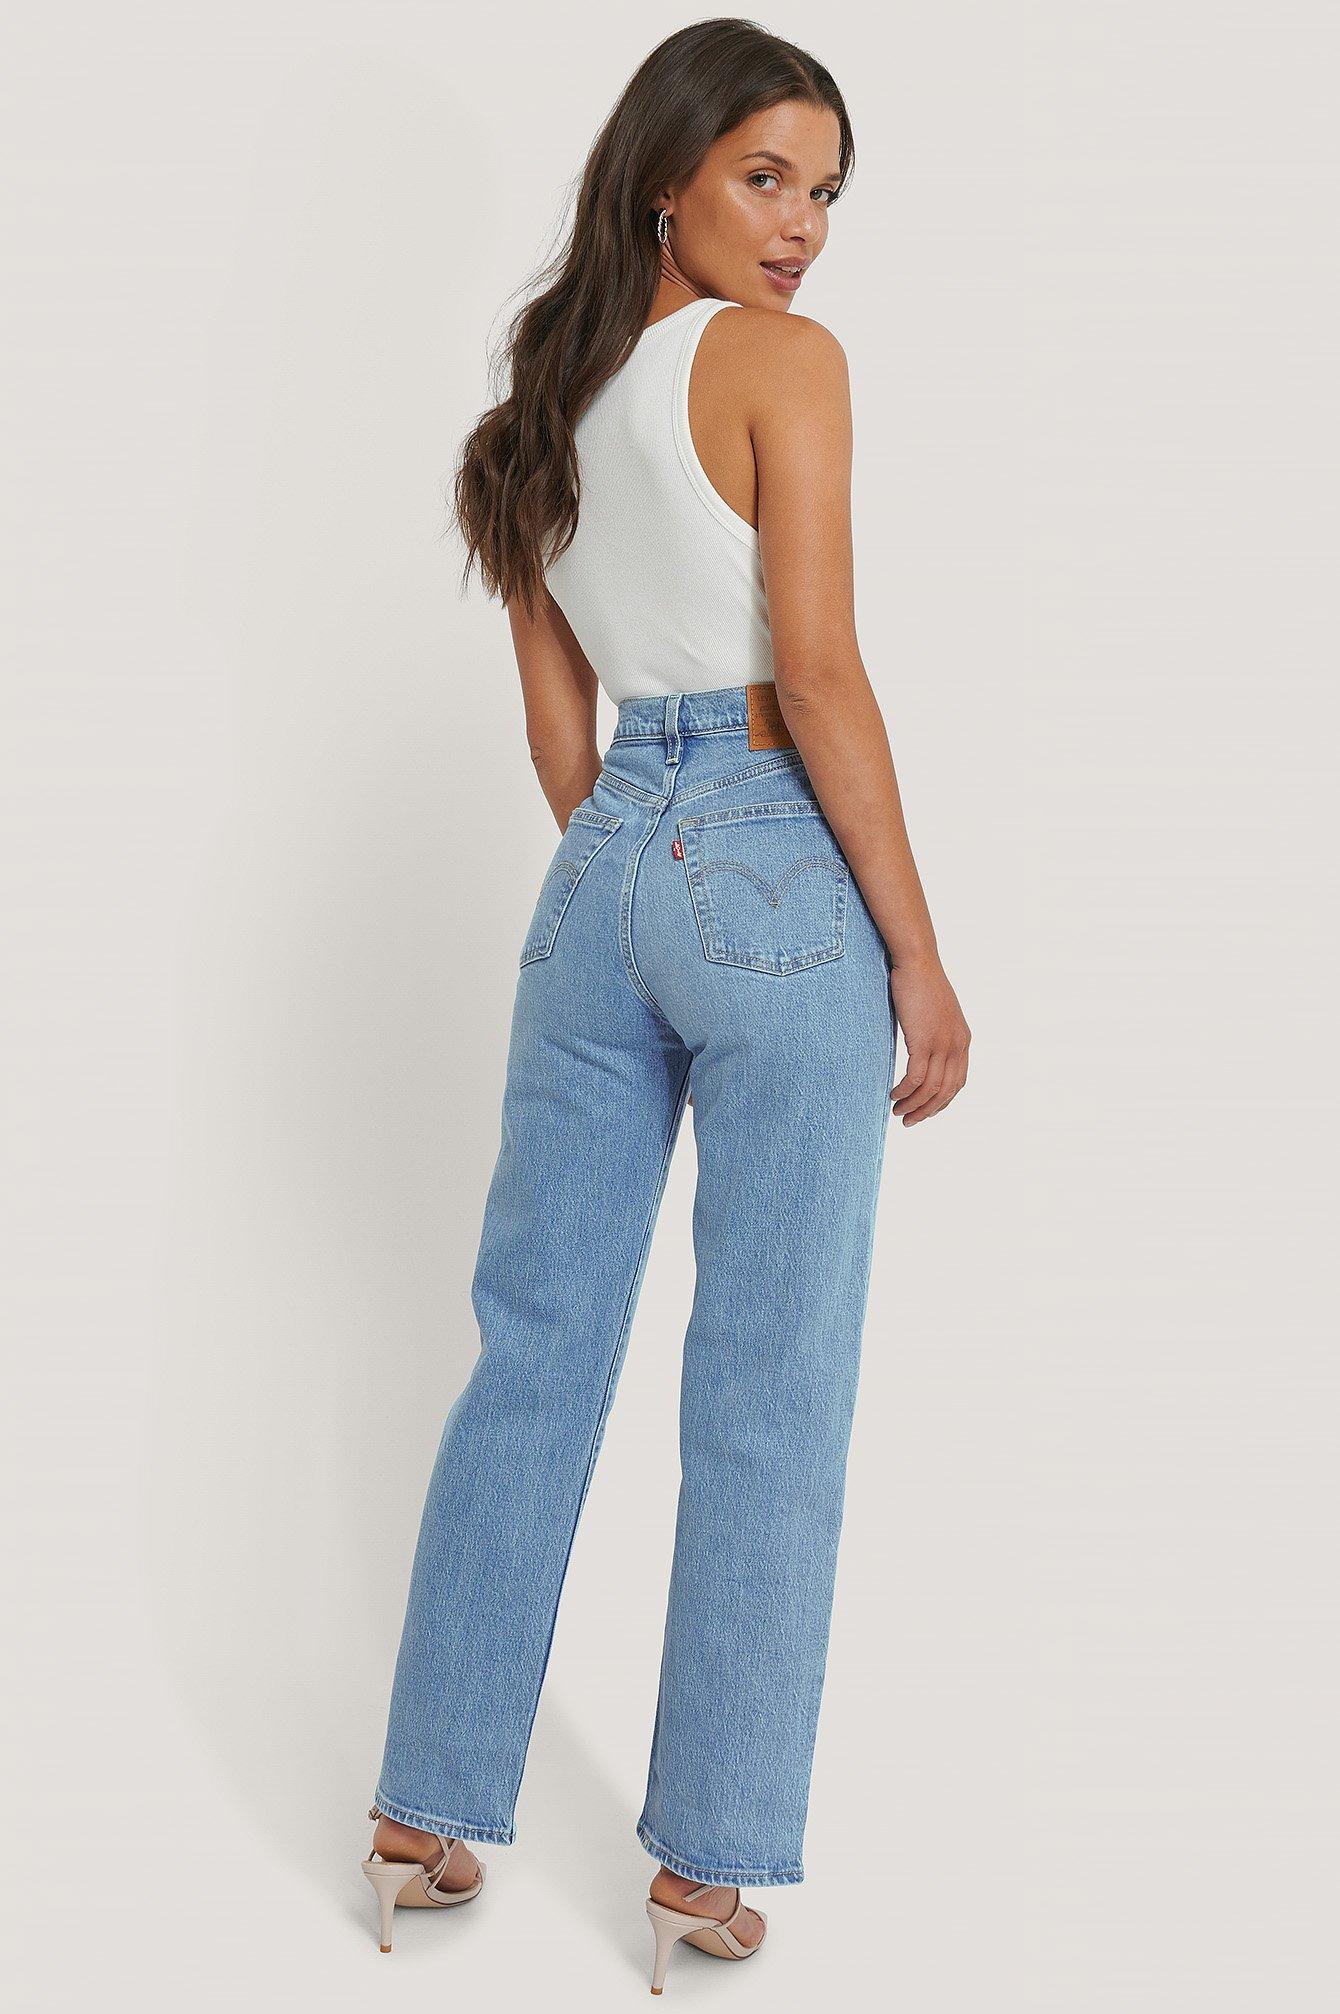 Buy > blue ribcage straight ankle jeans > in stock